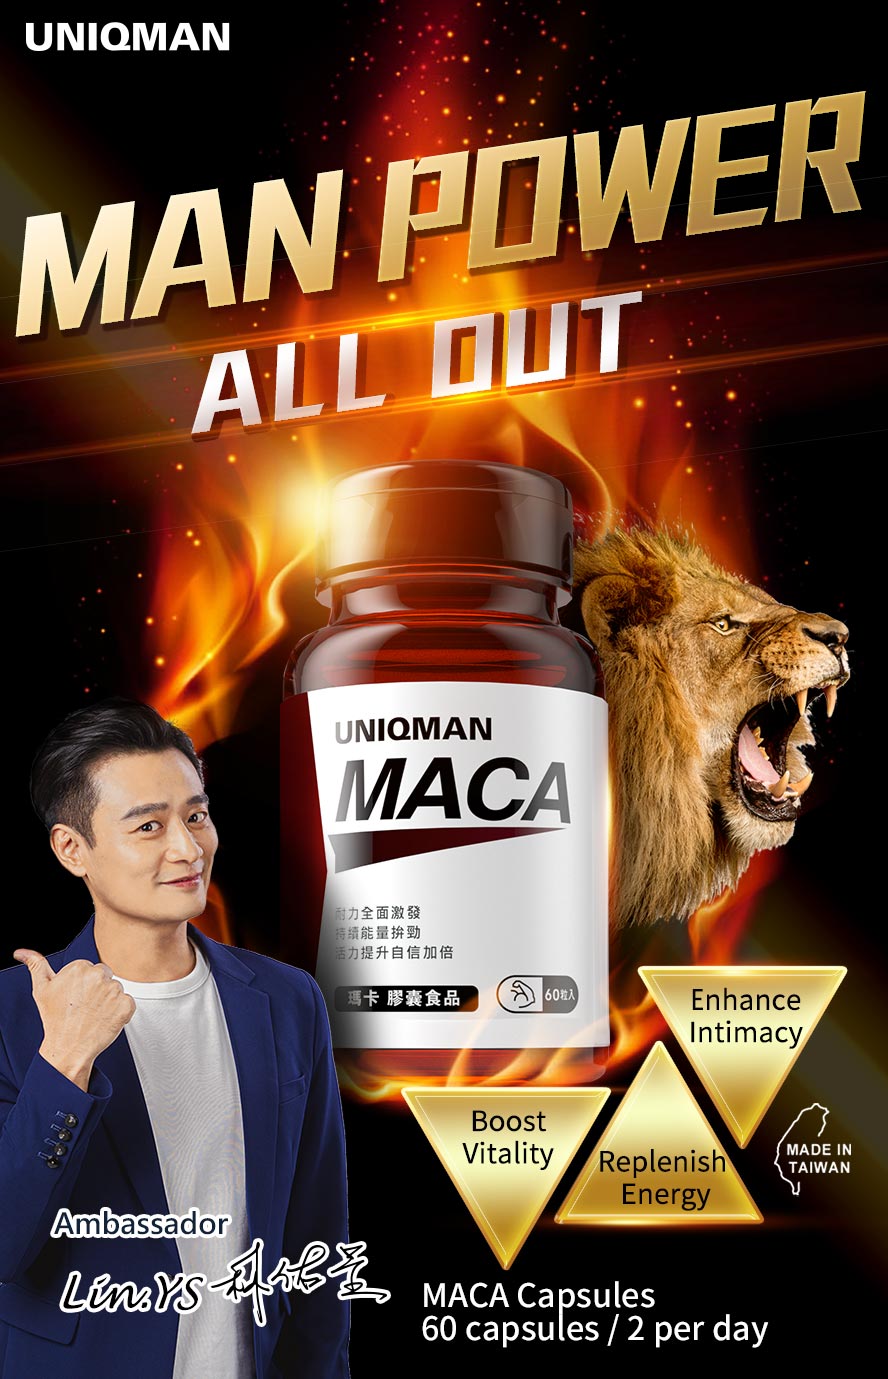 UNIQMAN Maca can replenish male energy and vitality, makes men stronger